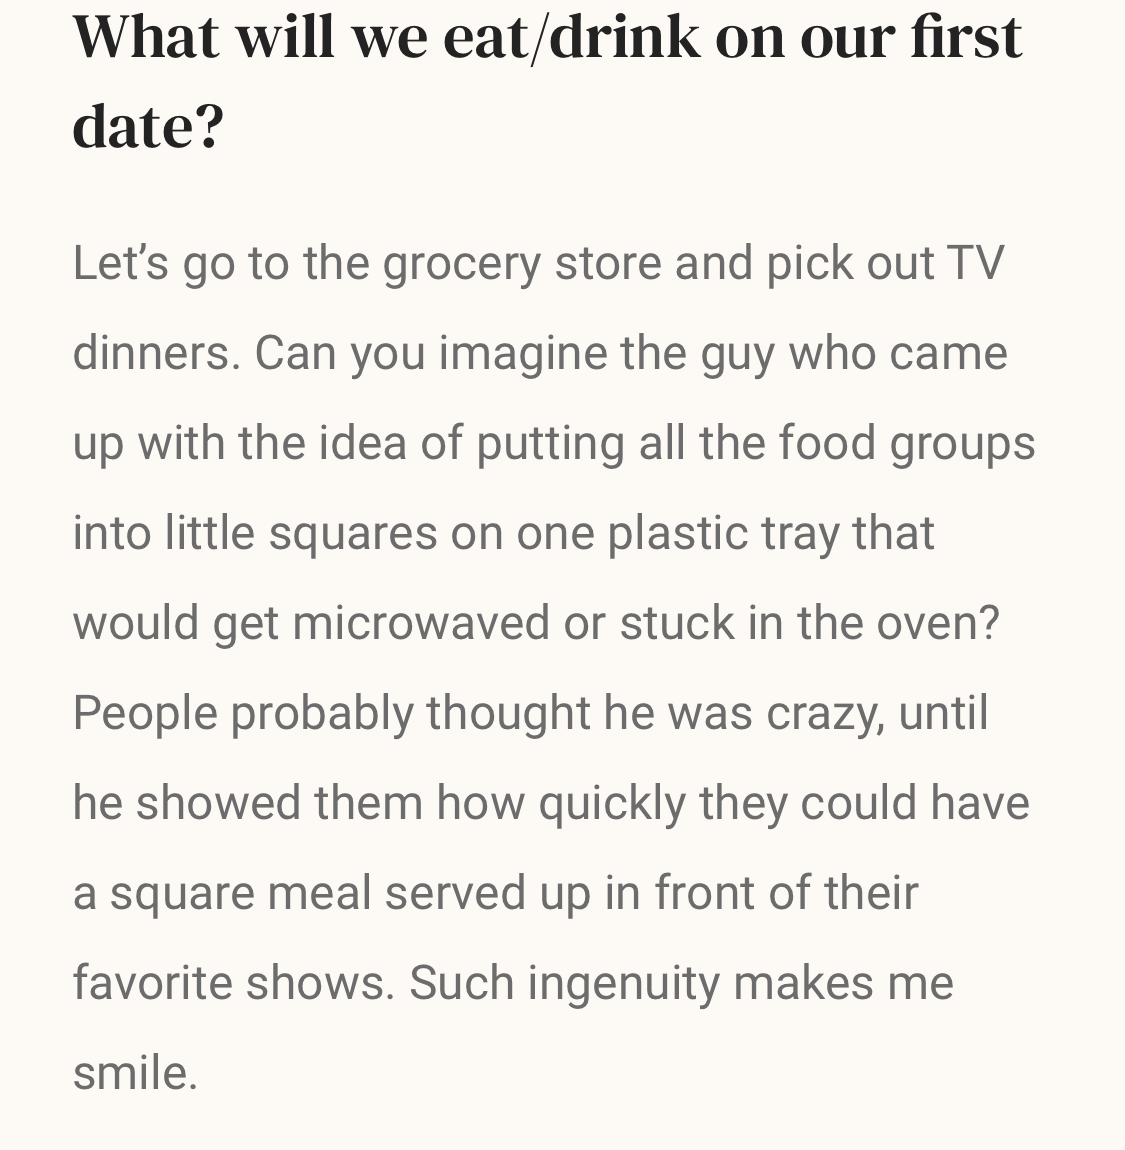 the book prompt is, what will we eat/drink on our first date?